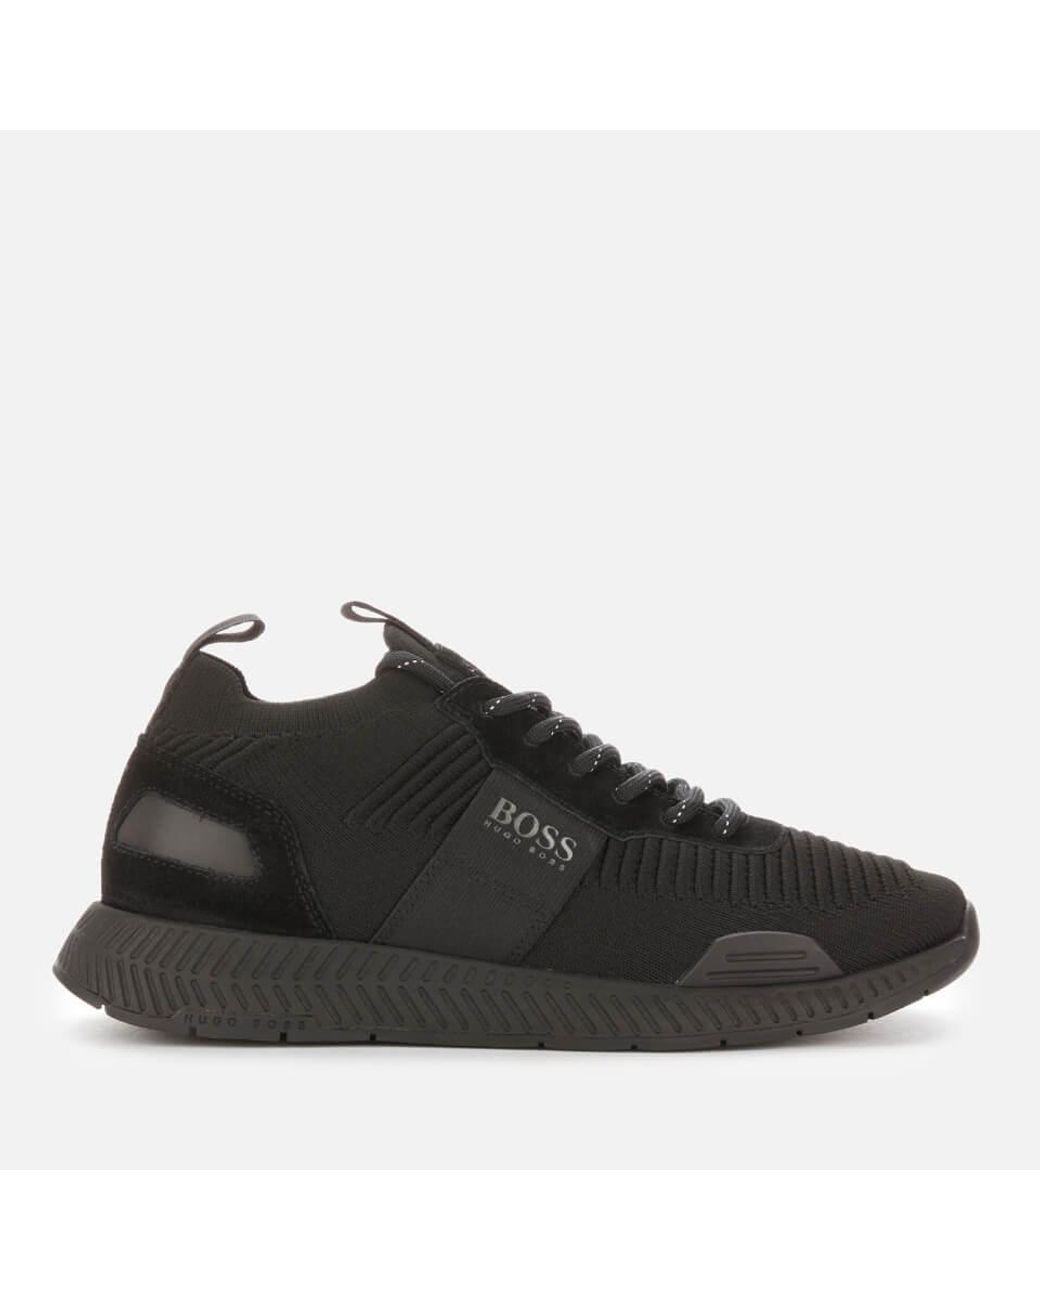 BOSS by HUGO BOSS Titanium Knit Running Style Trainers in Black for Men ...